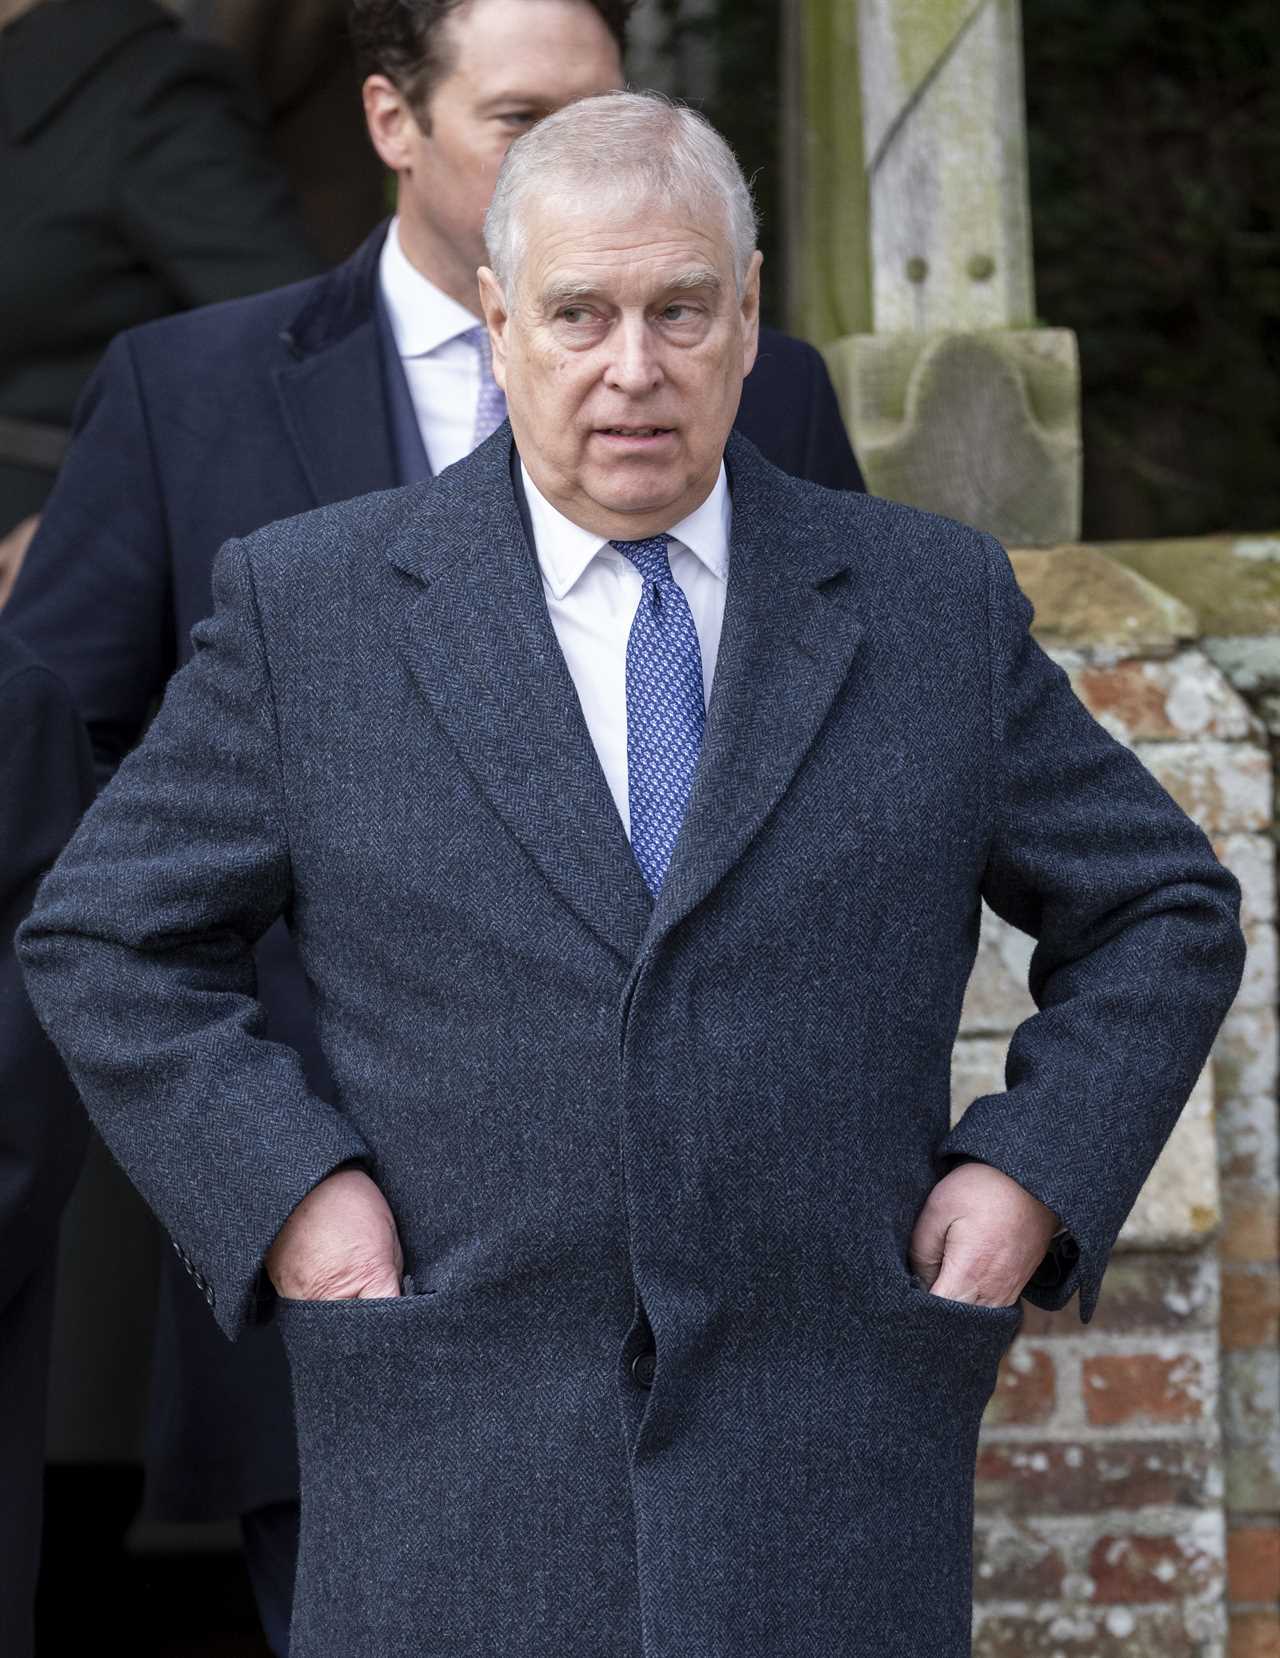 Prince Andrew's Strict New Year Diet Leaves Him in a 'Terrible Mood', Staff Say